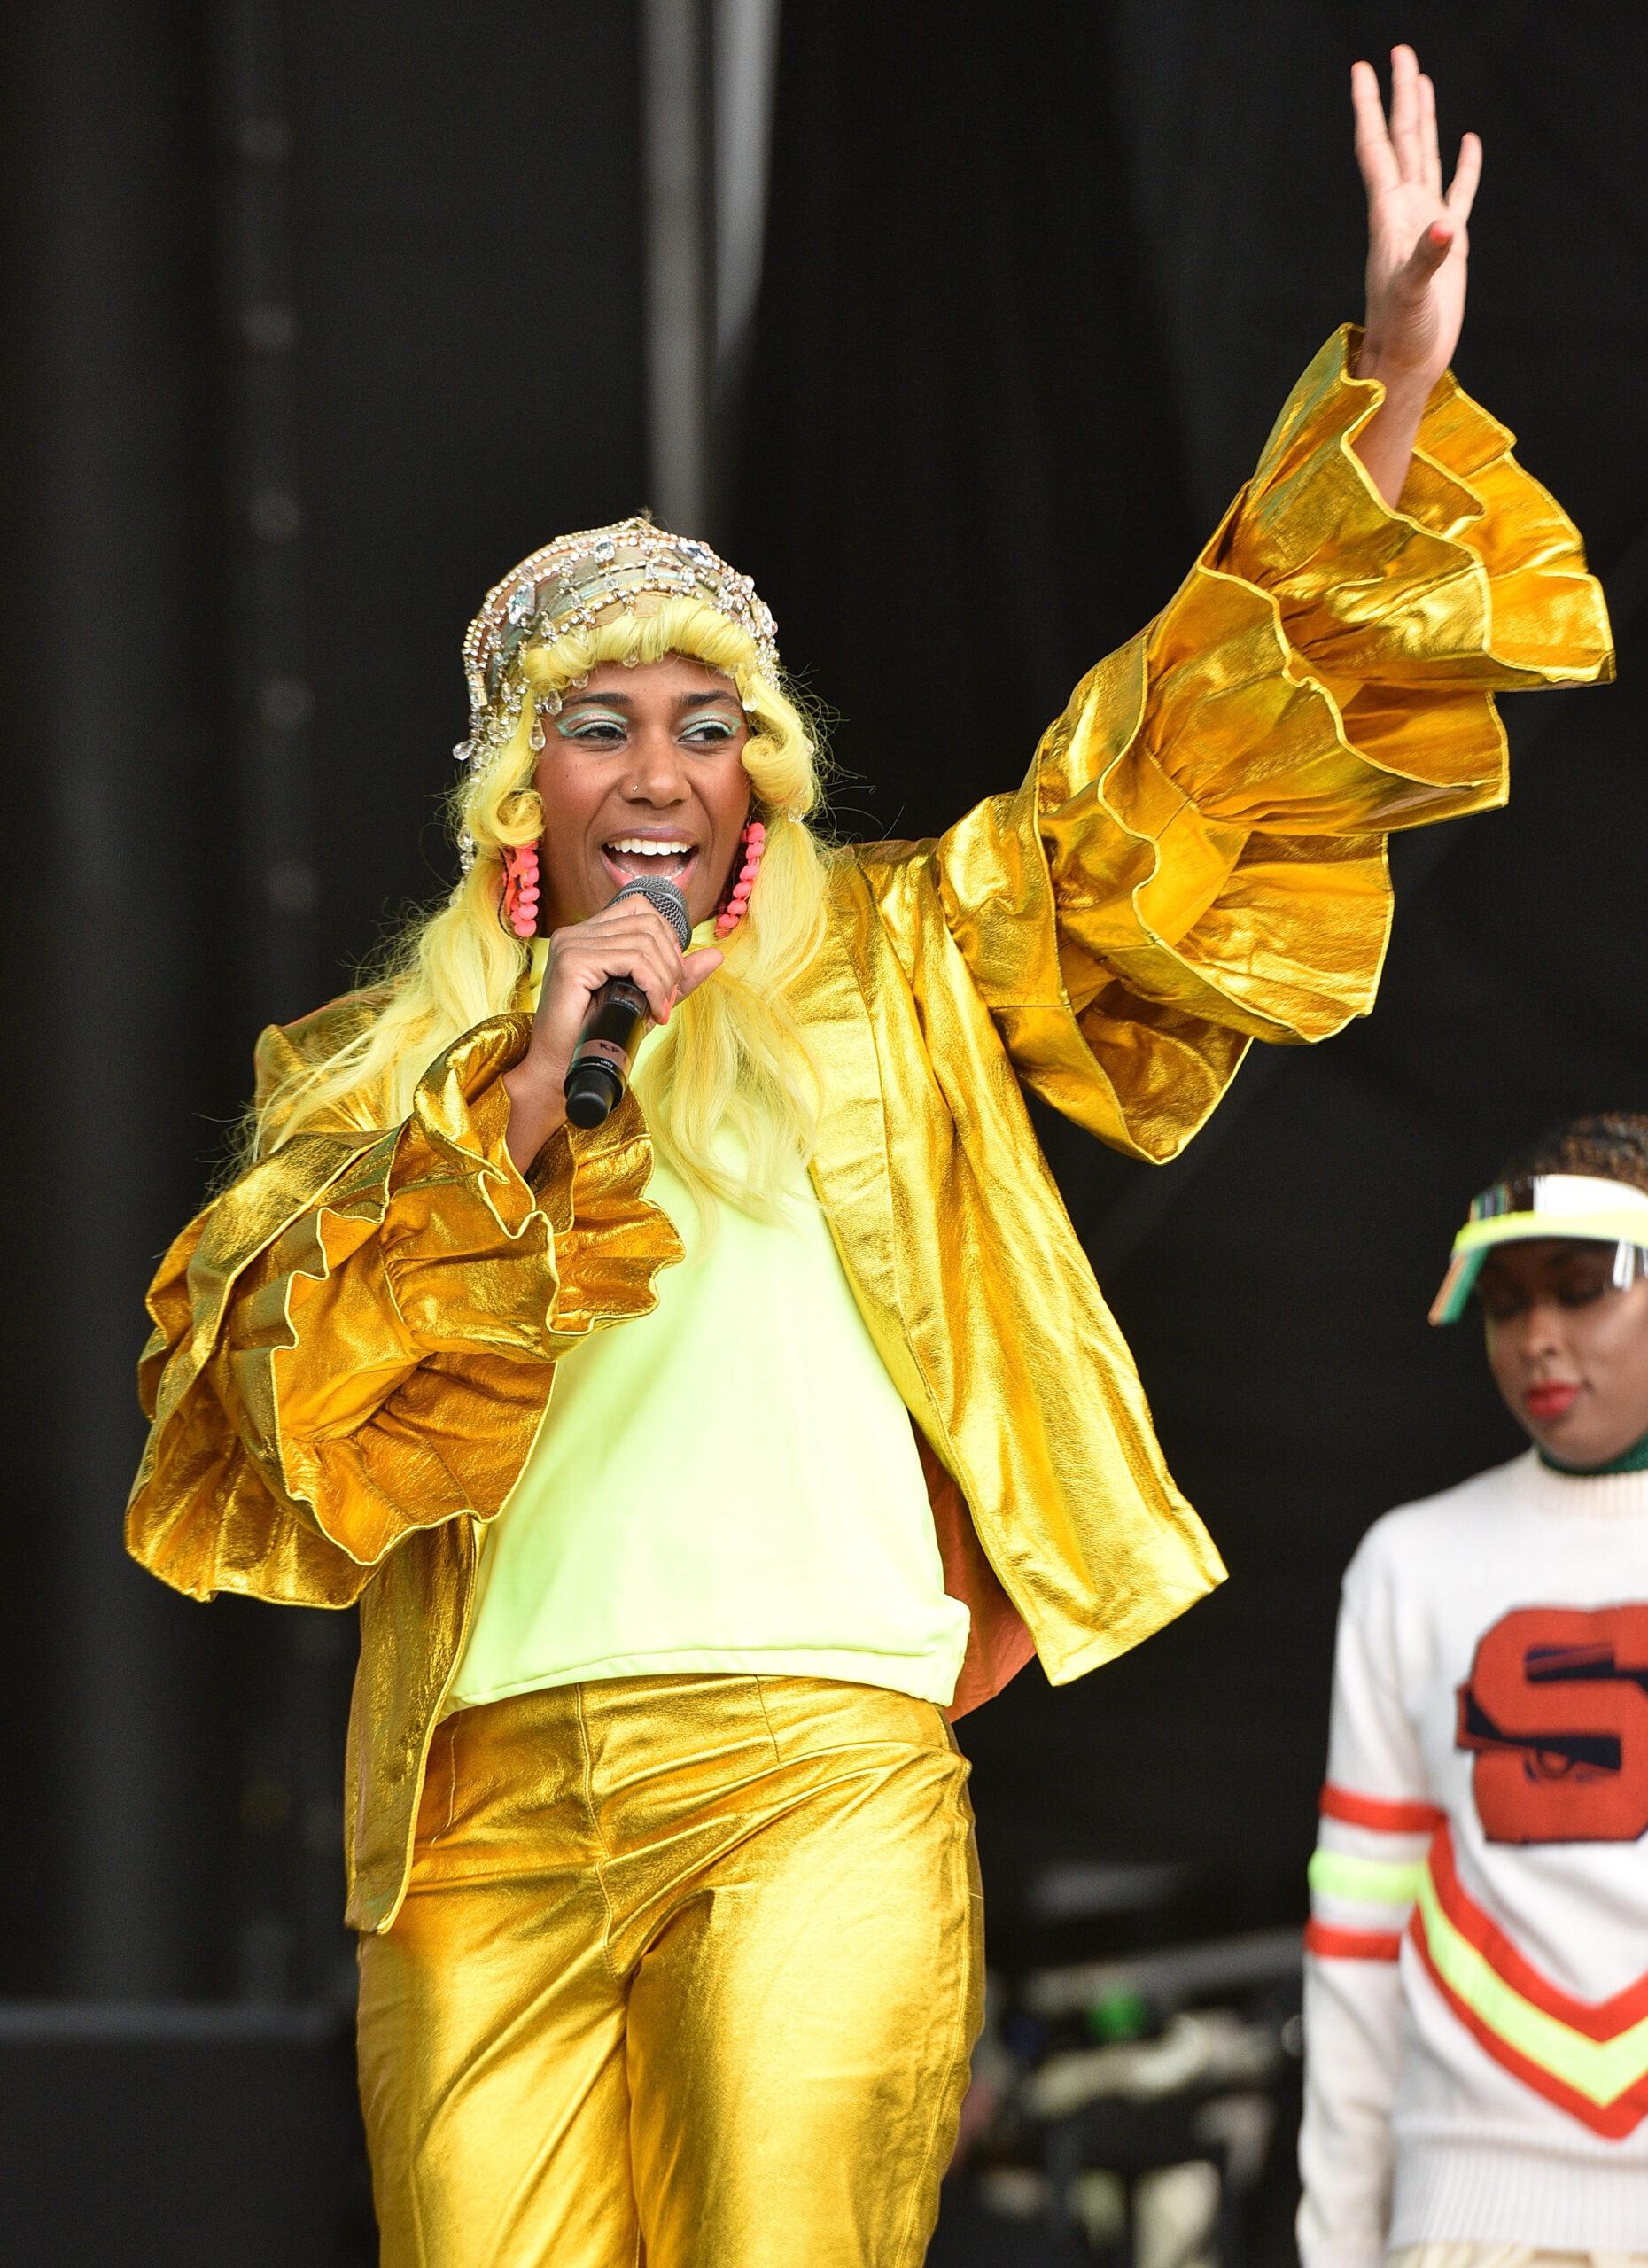 Santigold at the 2019 Outside Lands Music And Arts Festival at Golden Gate Park on August 10, 2019 in San Francisco, California